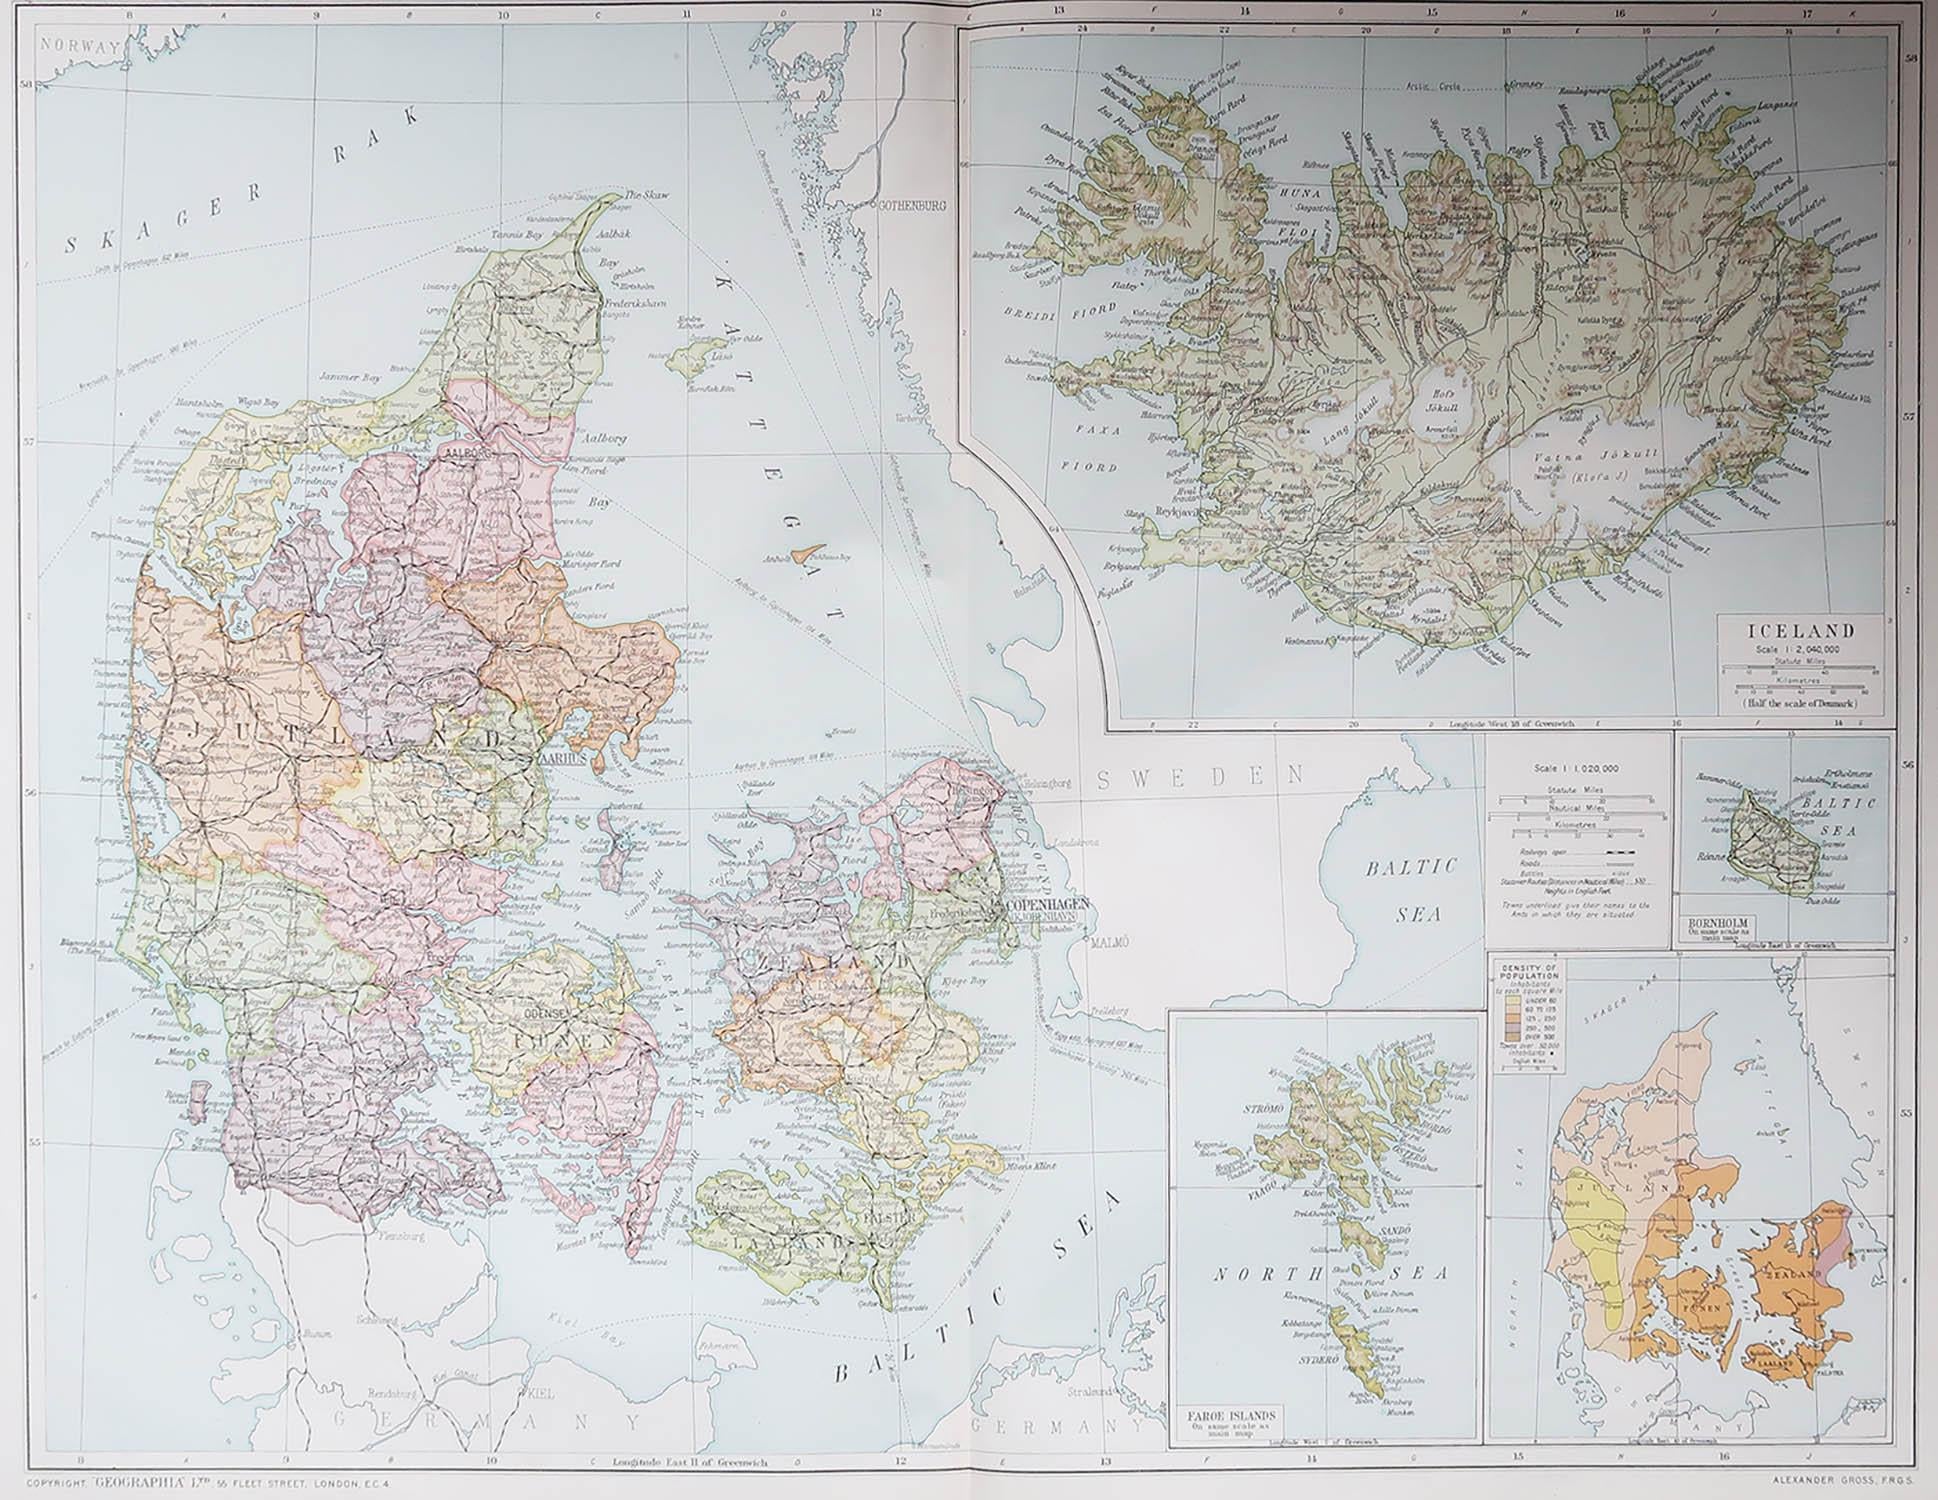 Great map of Iceland

Original color. Good condition

Published by Alexander Gross

Unframed.








